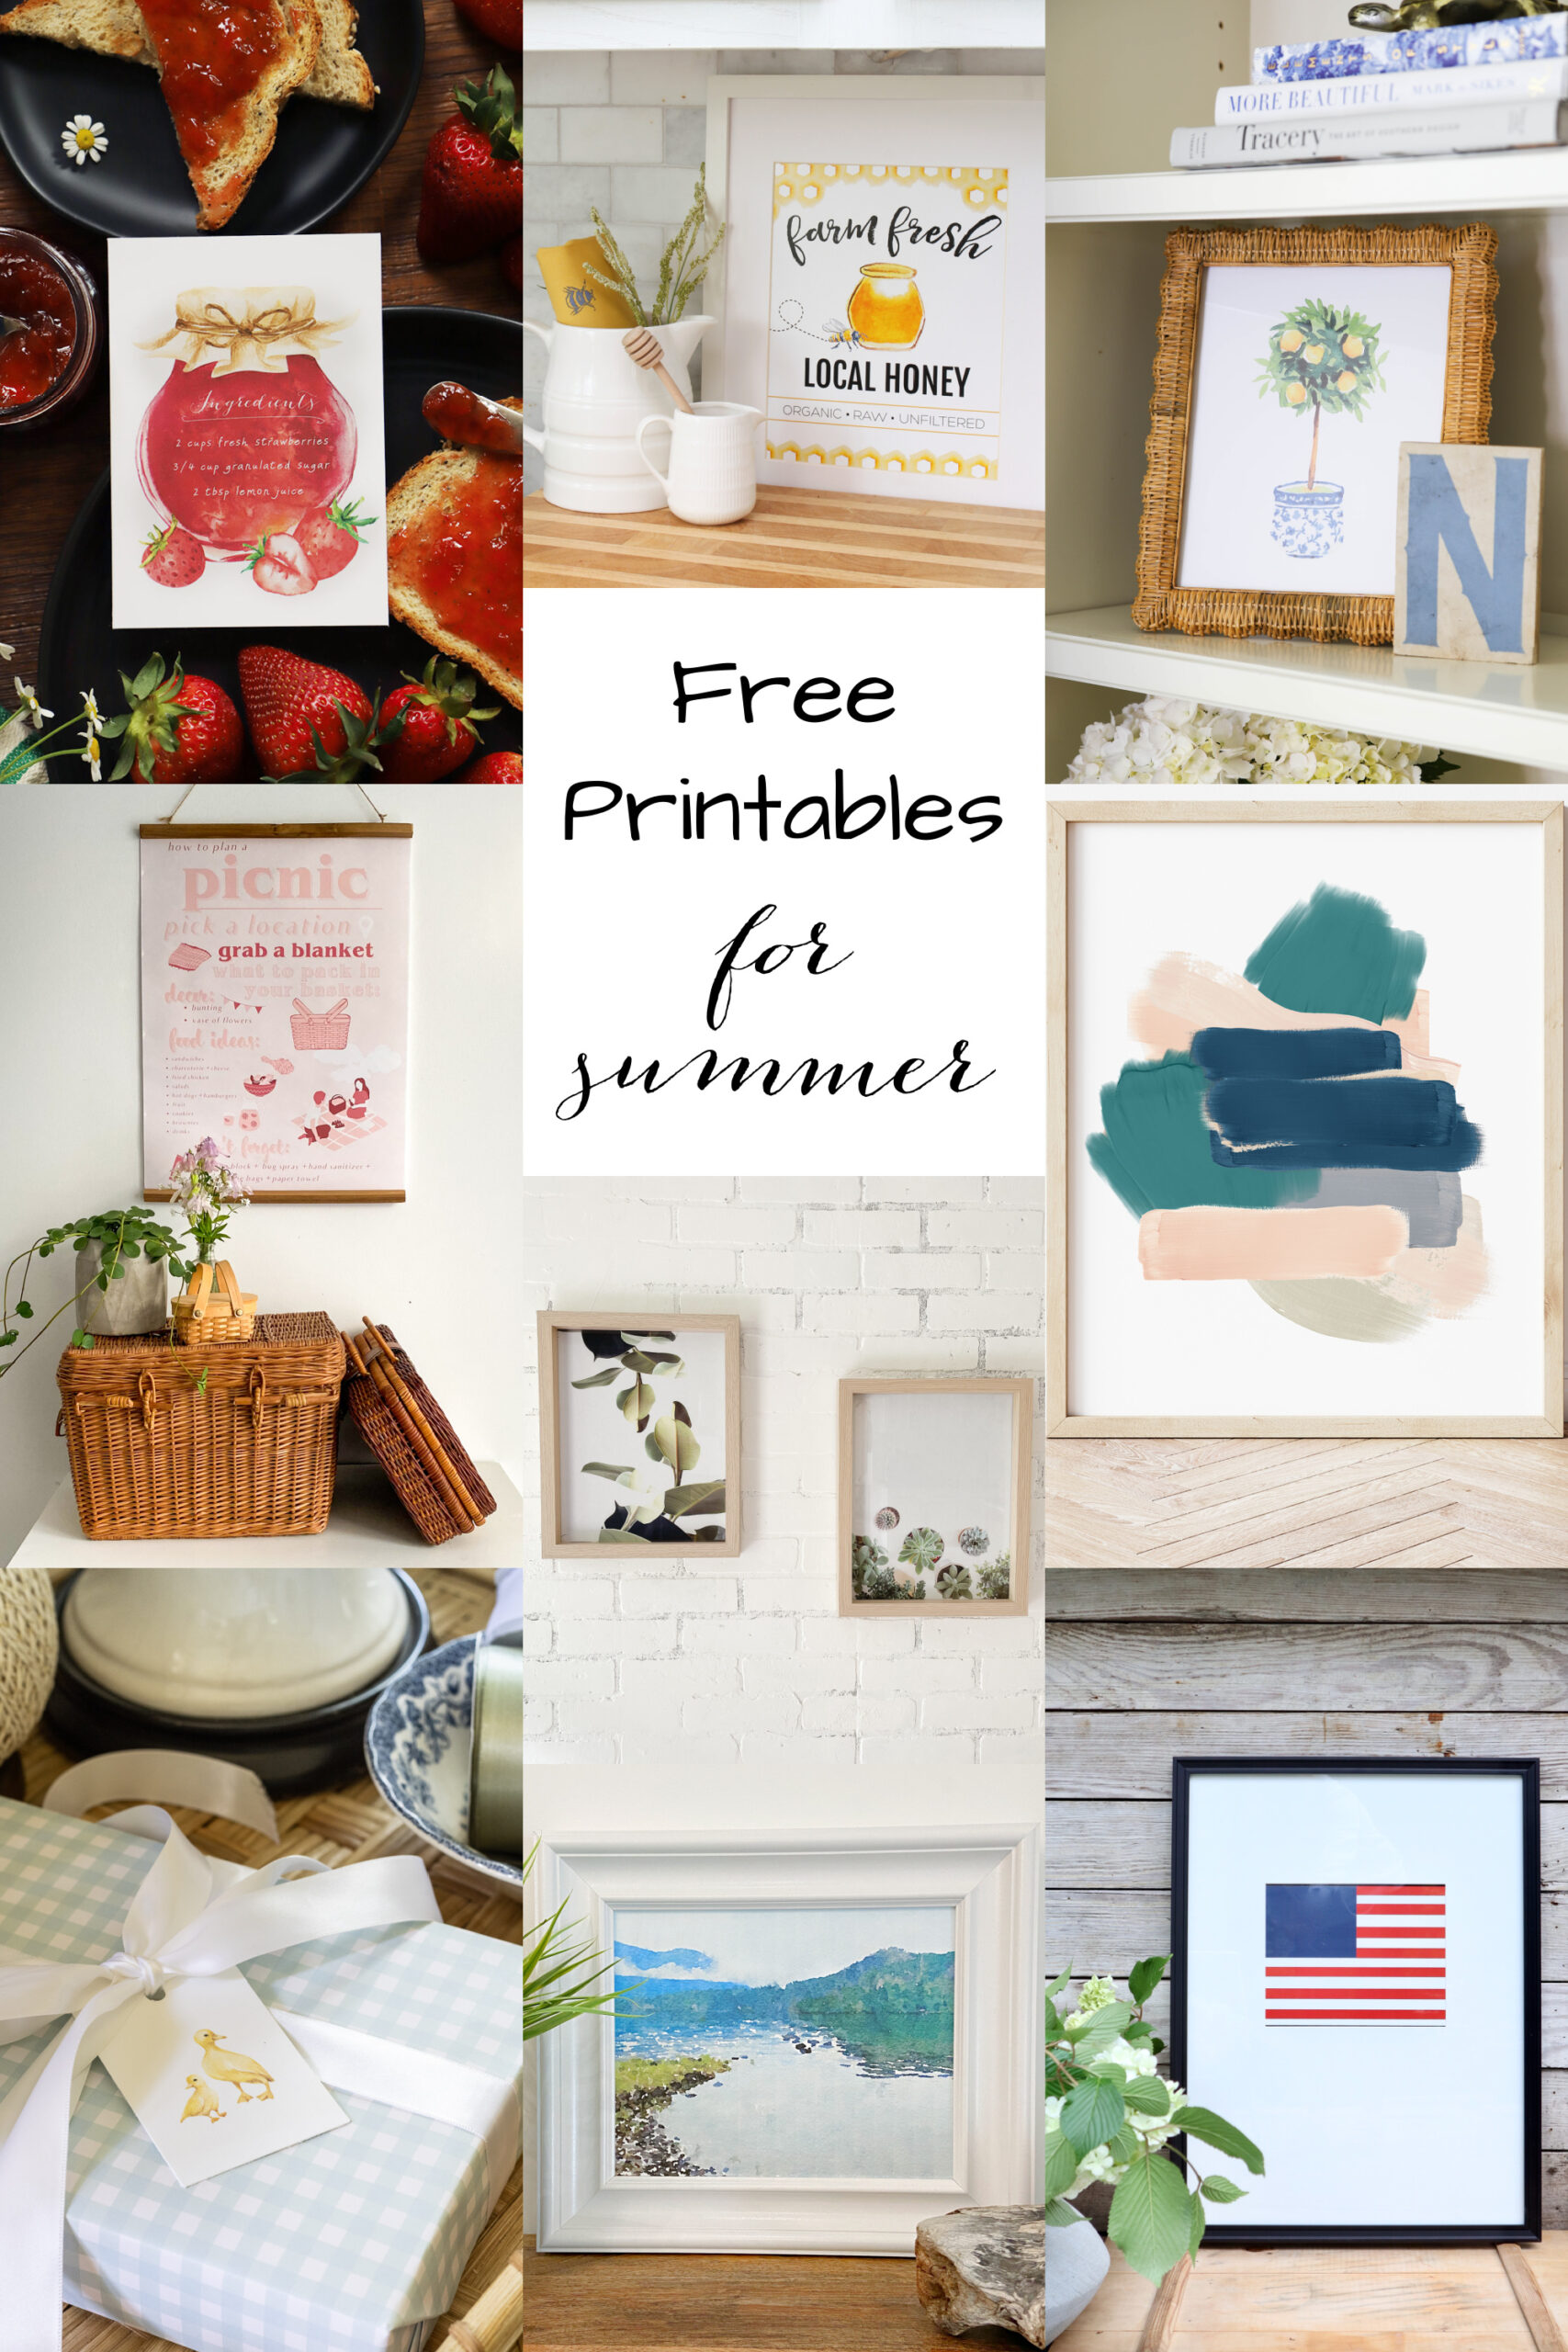 Free Printables For Summer poster.